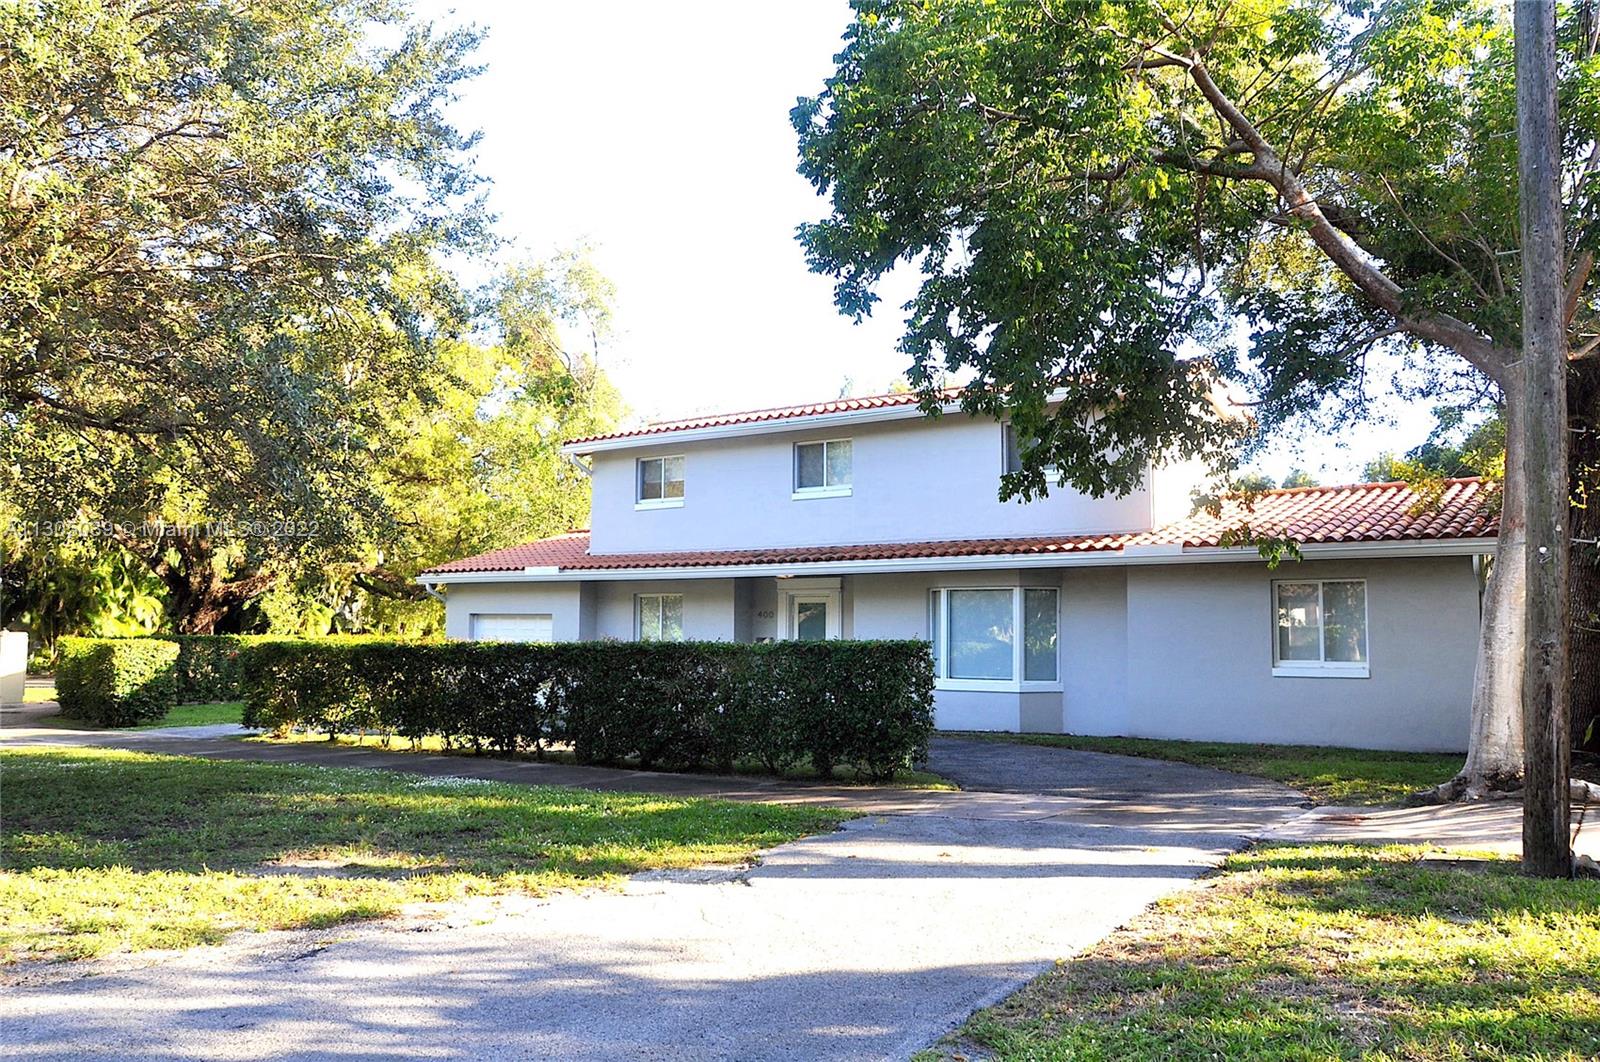 This is a beautiful home in the classical and a prestigious neighborhood of Coral Gables! This property is a corner property located at Le Jeune and Miller Rd. The property has mature oak trees that line the street. Great location close to the University of Miami great for professors and or UM students, minutes from Merrick Park, Miracle Mile, Venetian Pool and downtown Coral Gables, very close to Metro Rail station for easy access. The house has been newly painted inside and out, new carpets in bedrooms. Main floor has a formal dinning room, eat in kitchen and large family room and the master bedroom and bath. All the windows are high impact hurricane resistant, blinds and shades. The owner is relocating and needs to move. This is a prime location ready for you to move in.